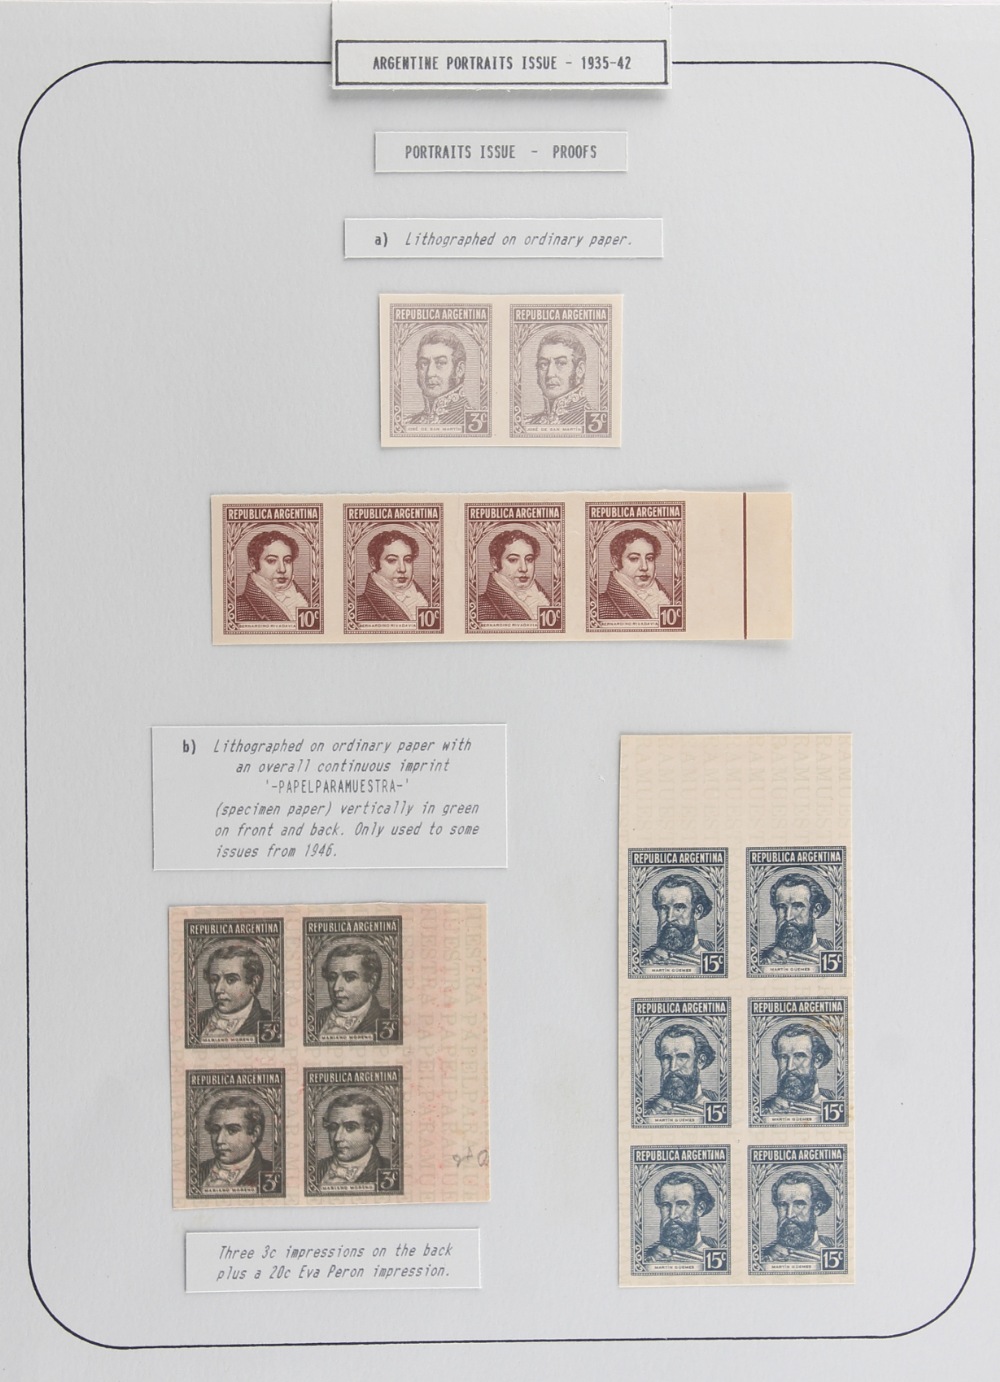 The Basil Lewis (1927-2019) collection of stamps - Argentina: 1935-60 Portraits, a study including